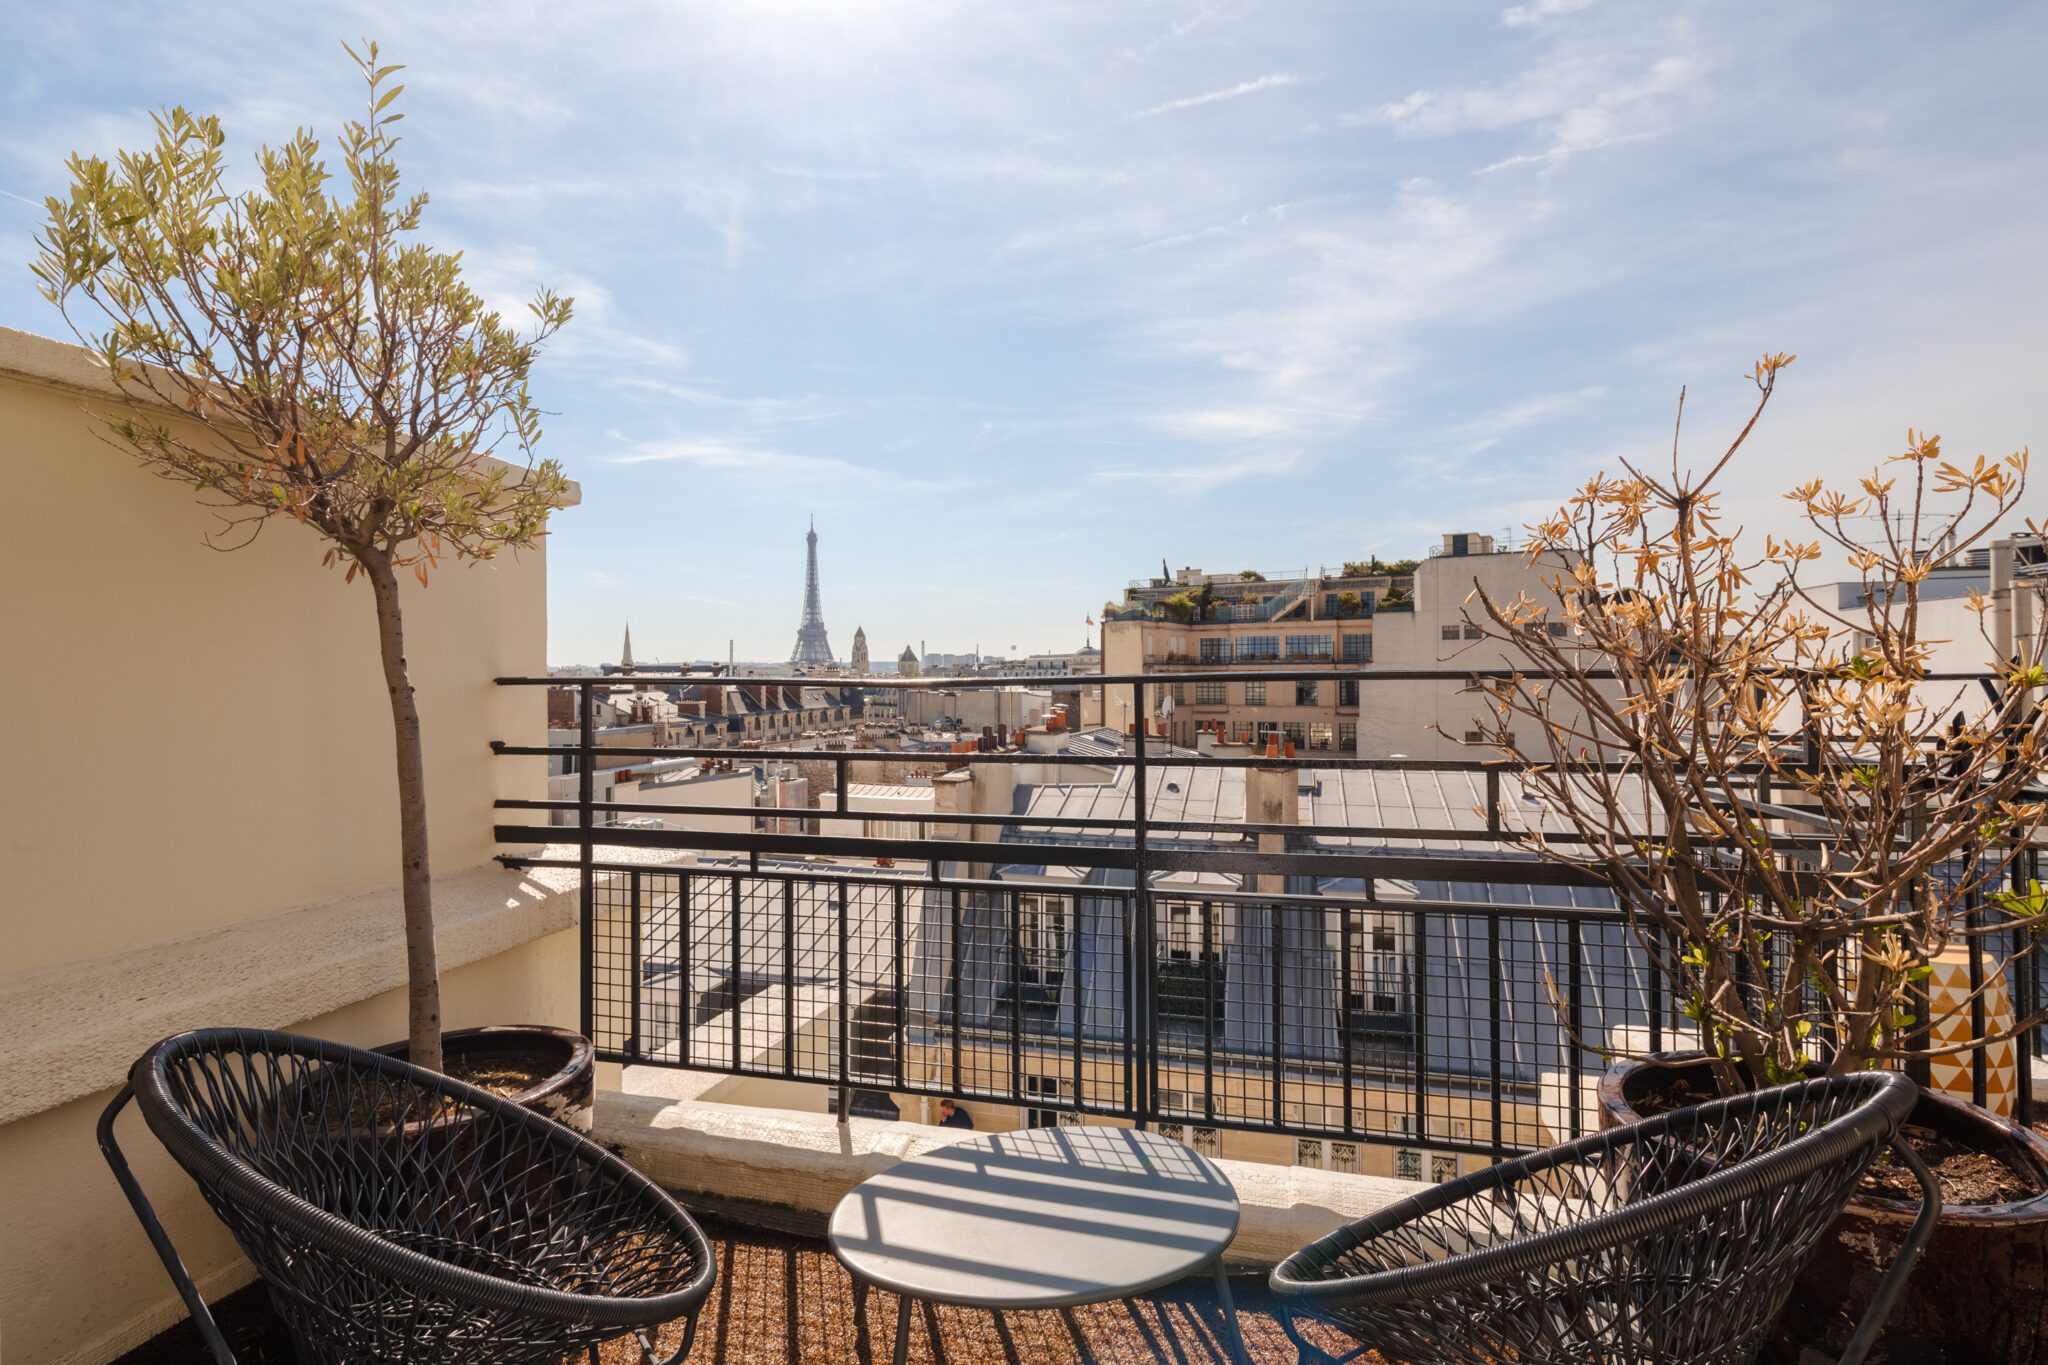 A view from Atala powered by Sonder in Paris, France, with the Eiffel Tower in the background. Source: Sonder